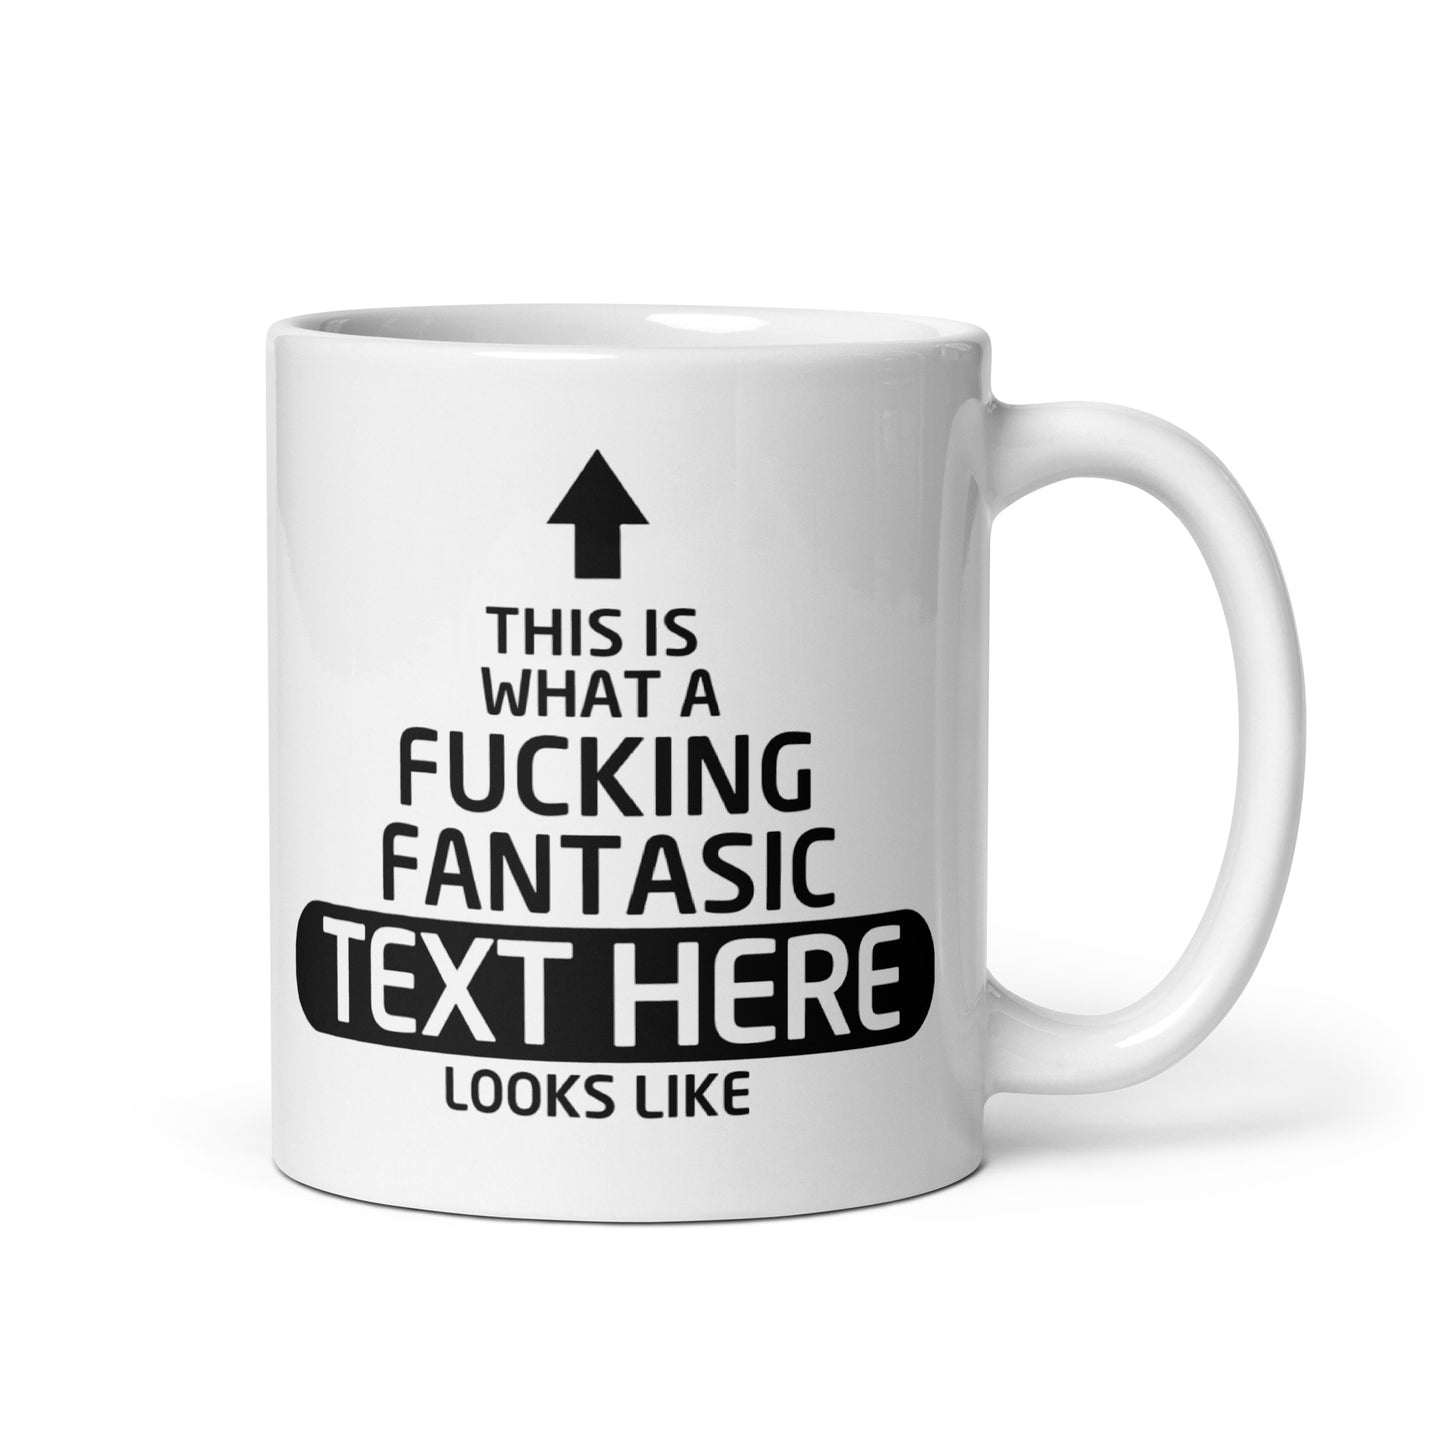 Design Your Self Build Mug - 11oz - Personalised Gift for Self Builders - This Is What A Fucking Fantastic Text Here Looks Like